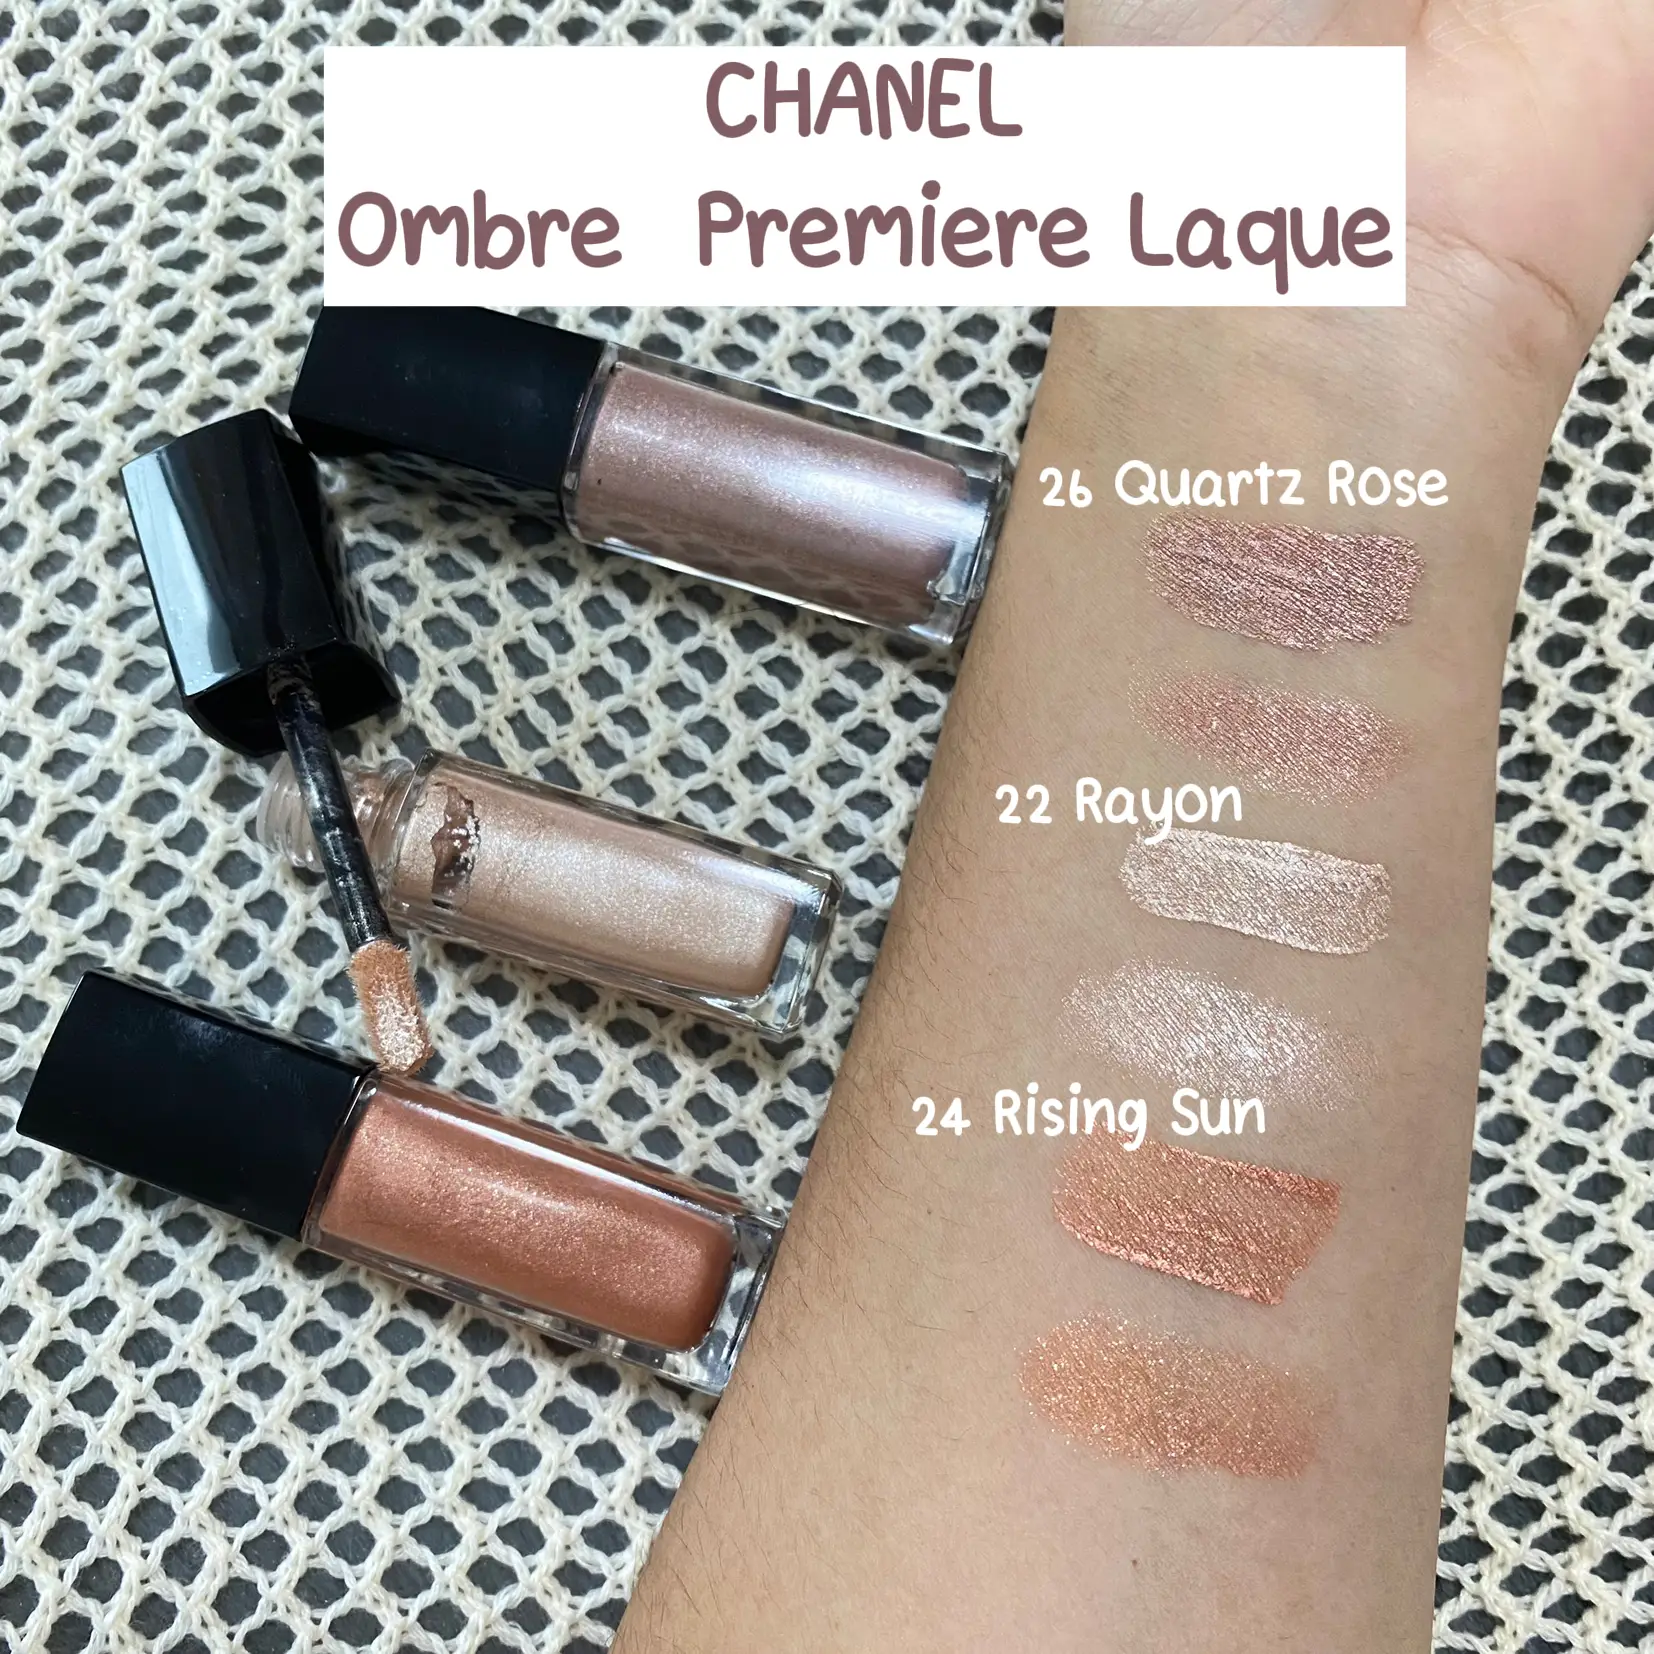 Liquid eyeshadow worth having in possession of CHANEL, Gallery posted by  LittlecatReview